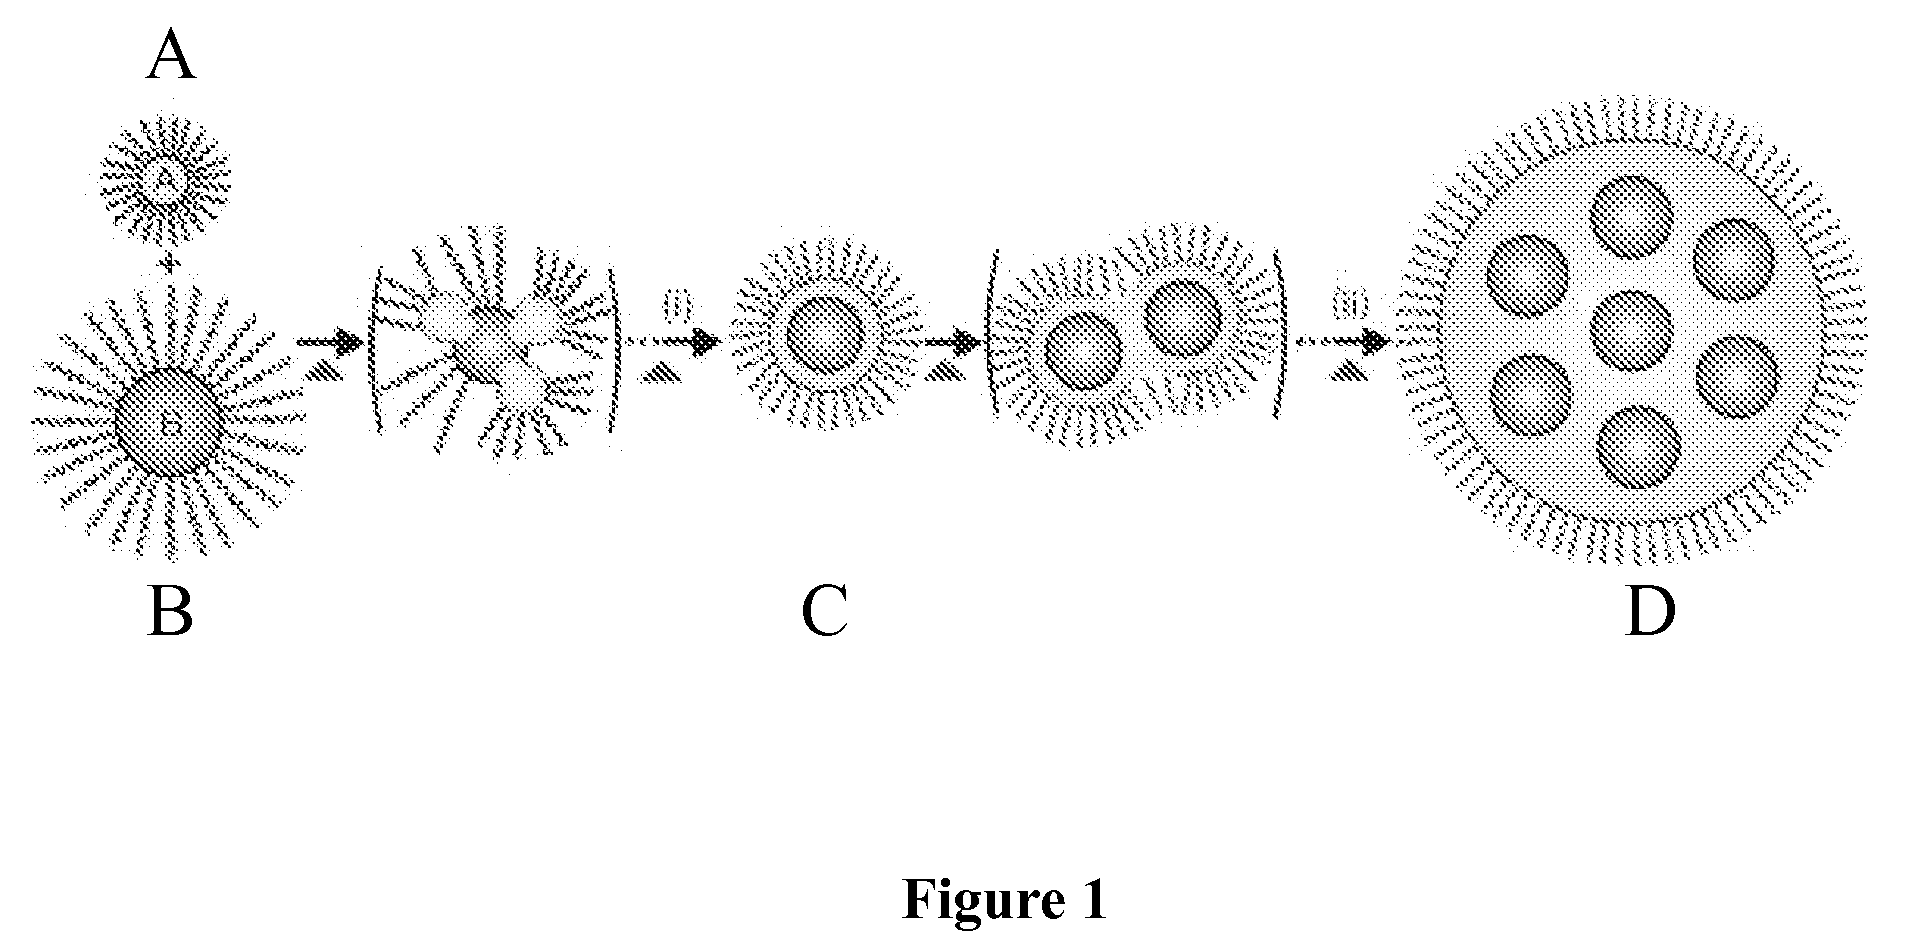 Core-shell nanoparticles with multiple cores and a method for fabricating them